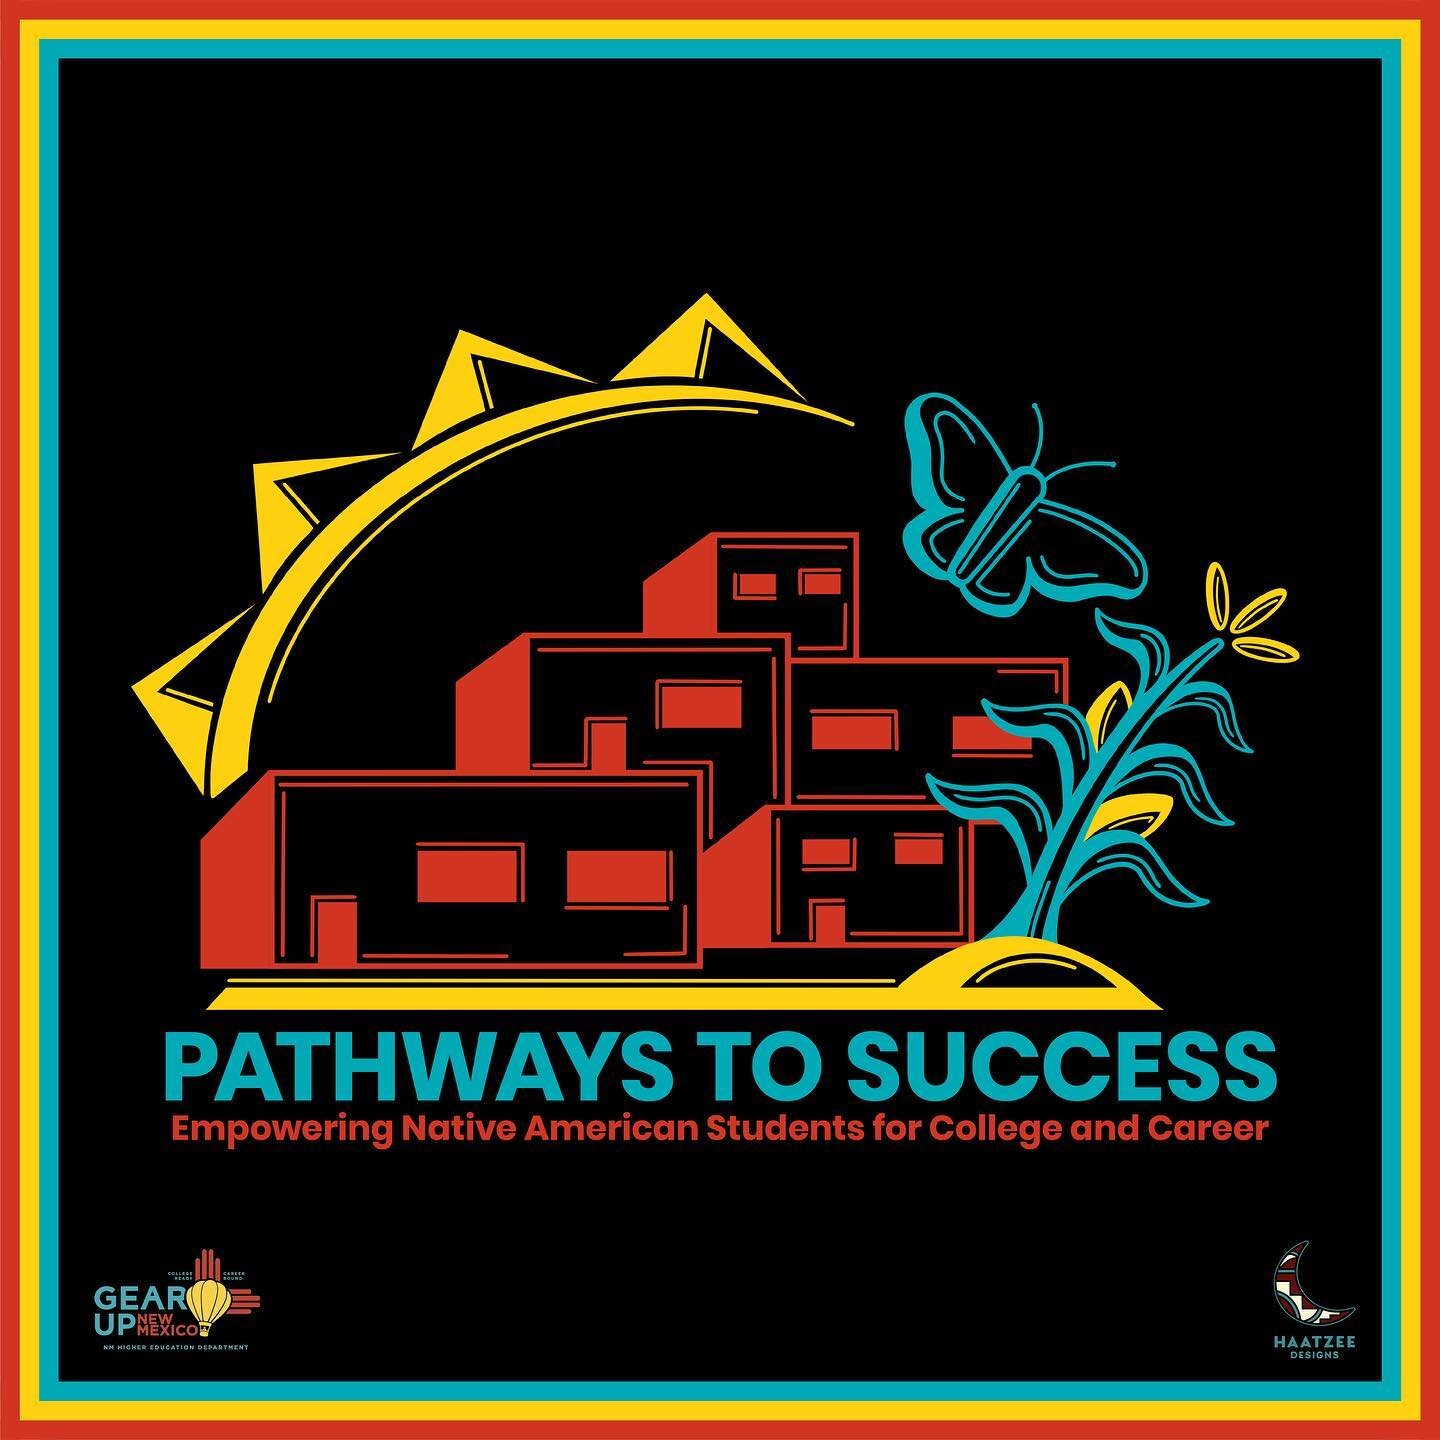 Had the honor in creating graphic elements for GEAR UP New Mexico&rsquo;s Pathways to Success: Empowering Native American Students for College and Career conference ✨

GEAR UP New Mexico, a division of the New Mexico Higher Education Department, is a